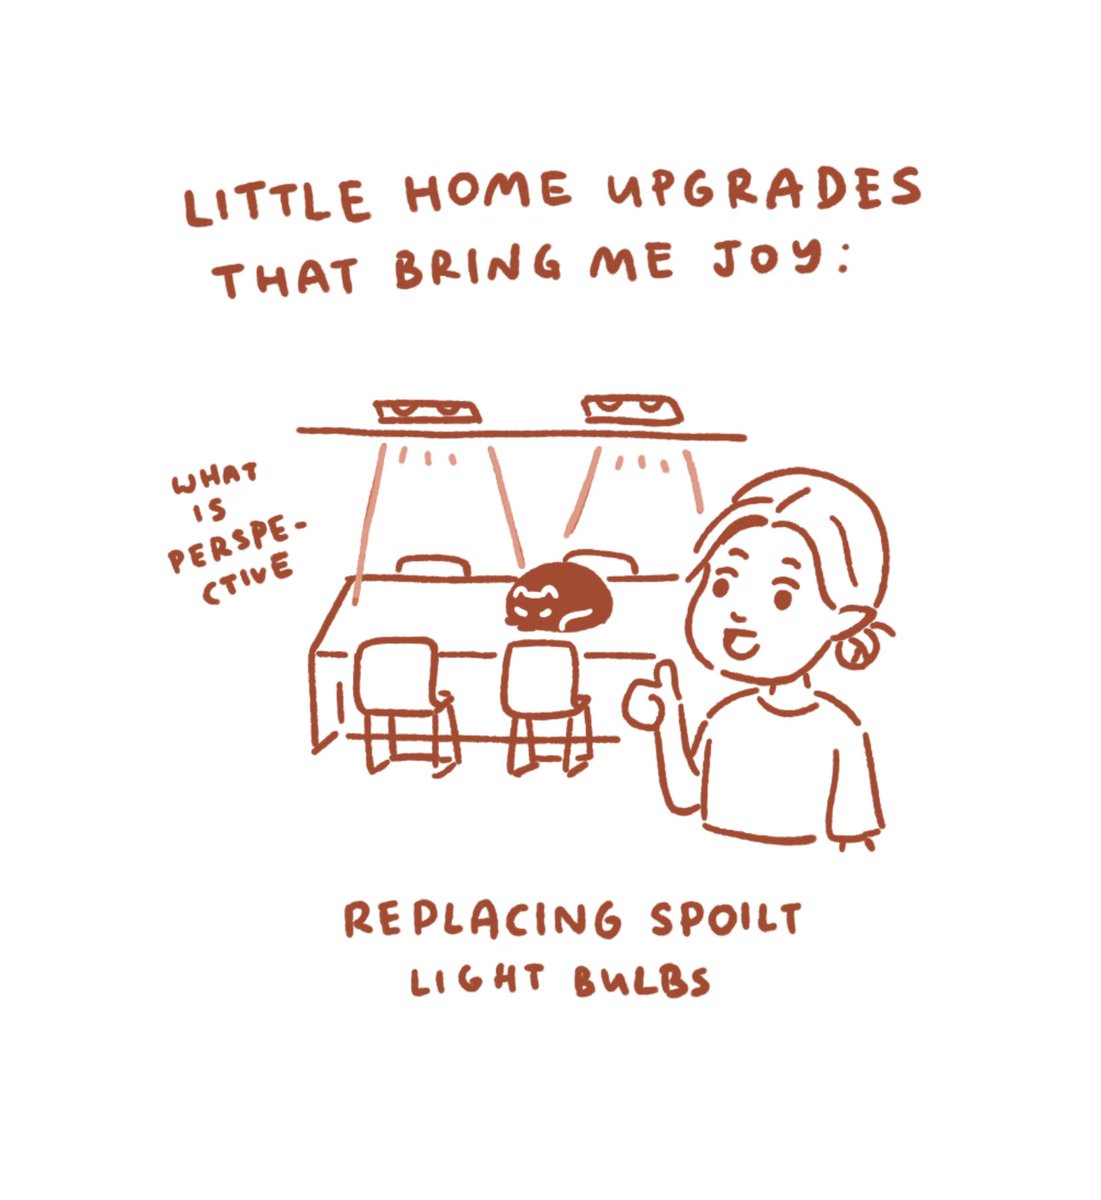 Important home upgrades 